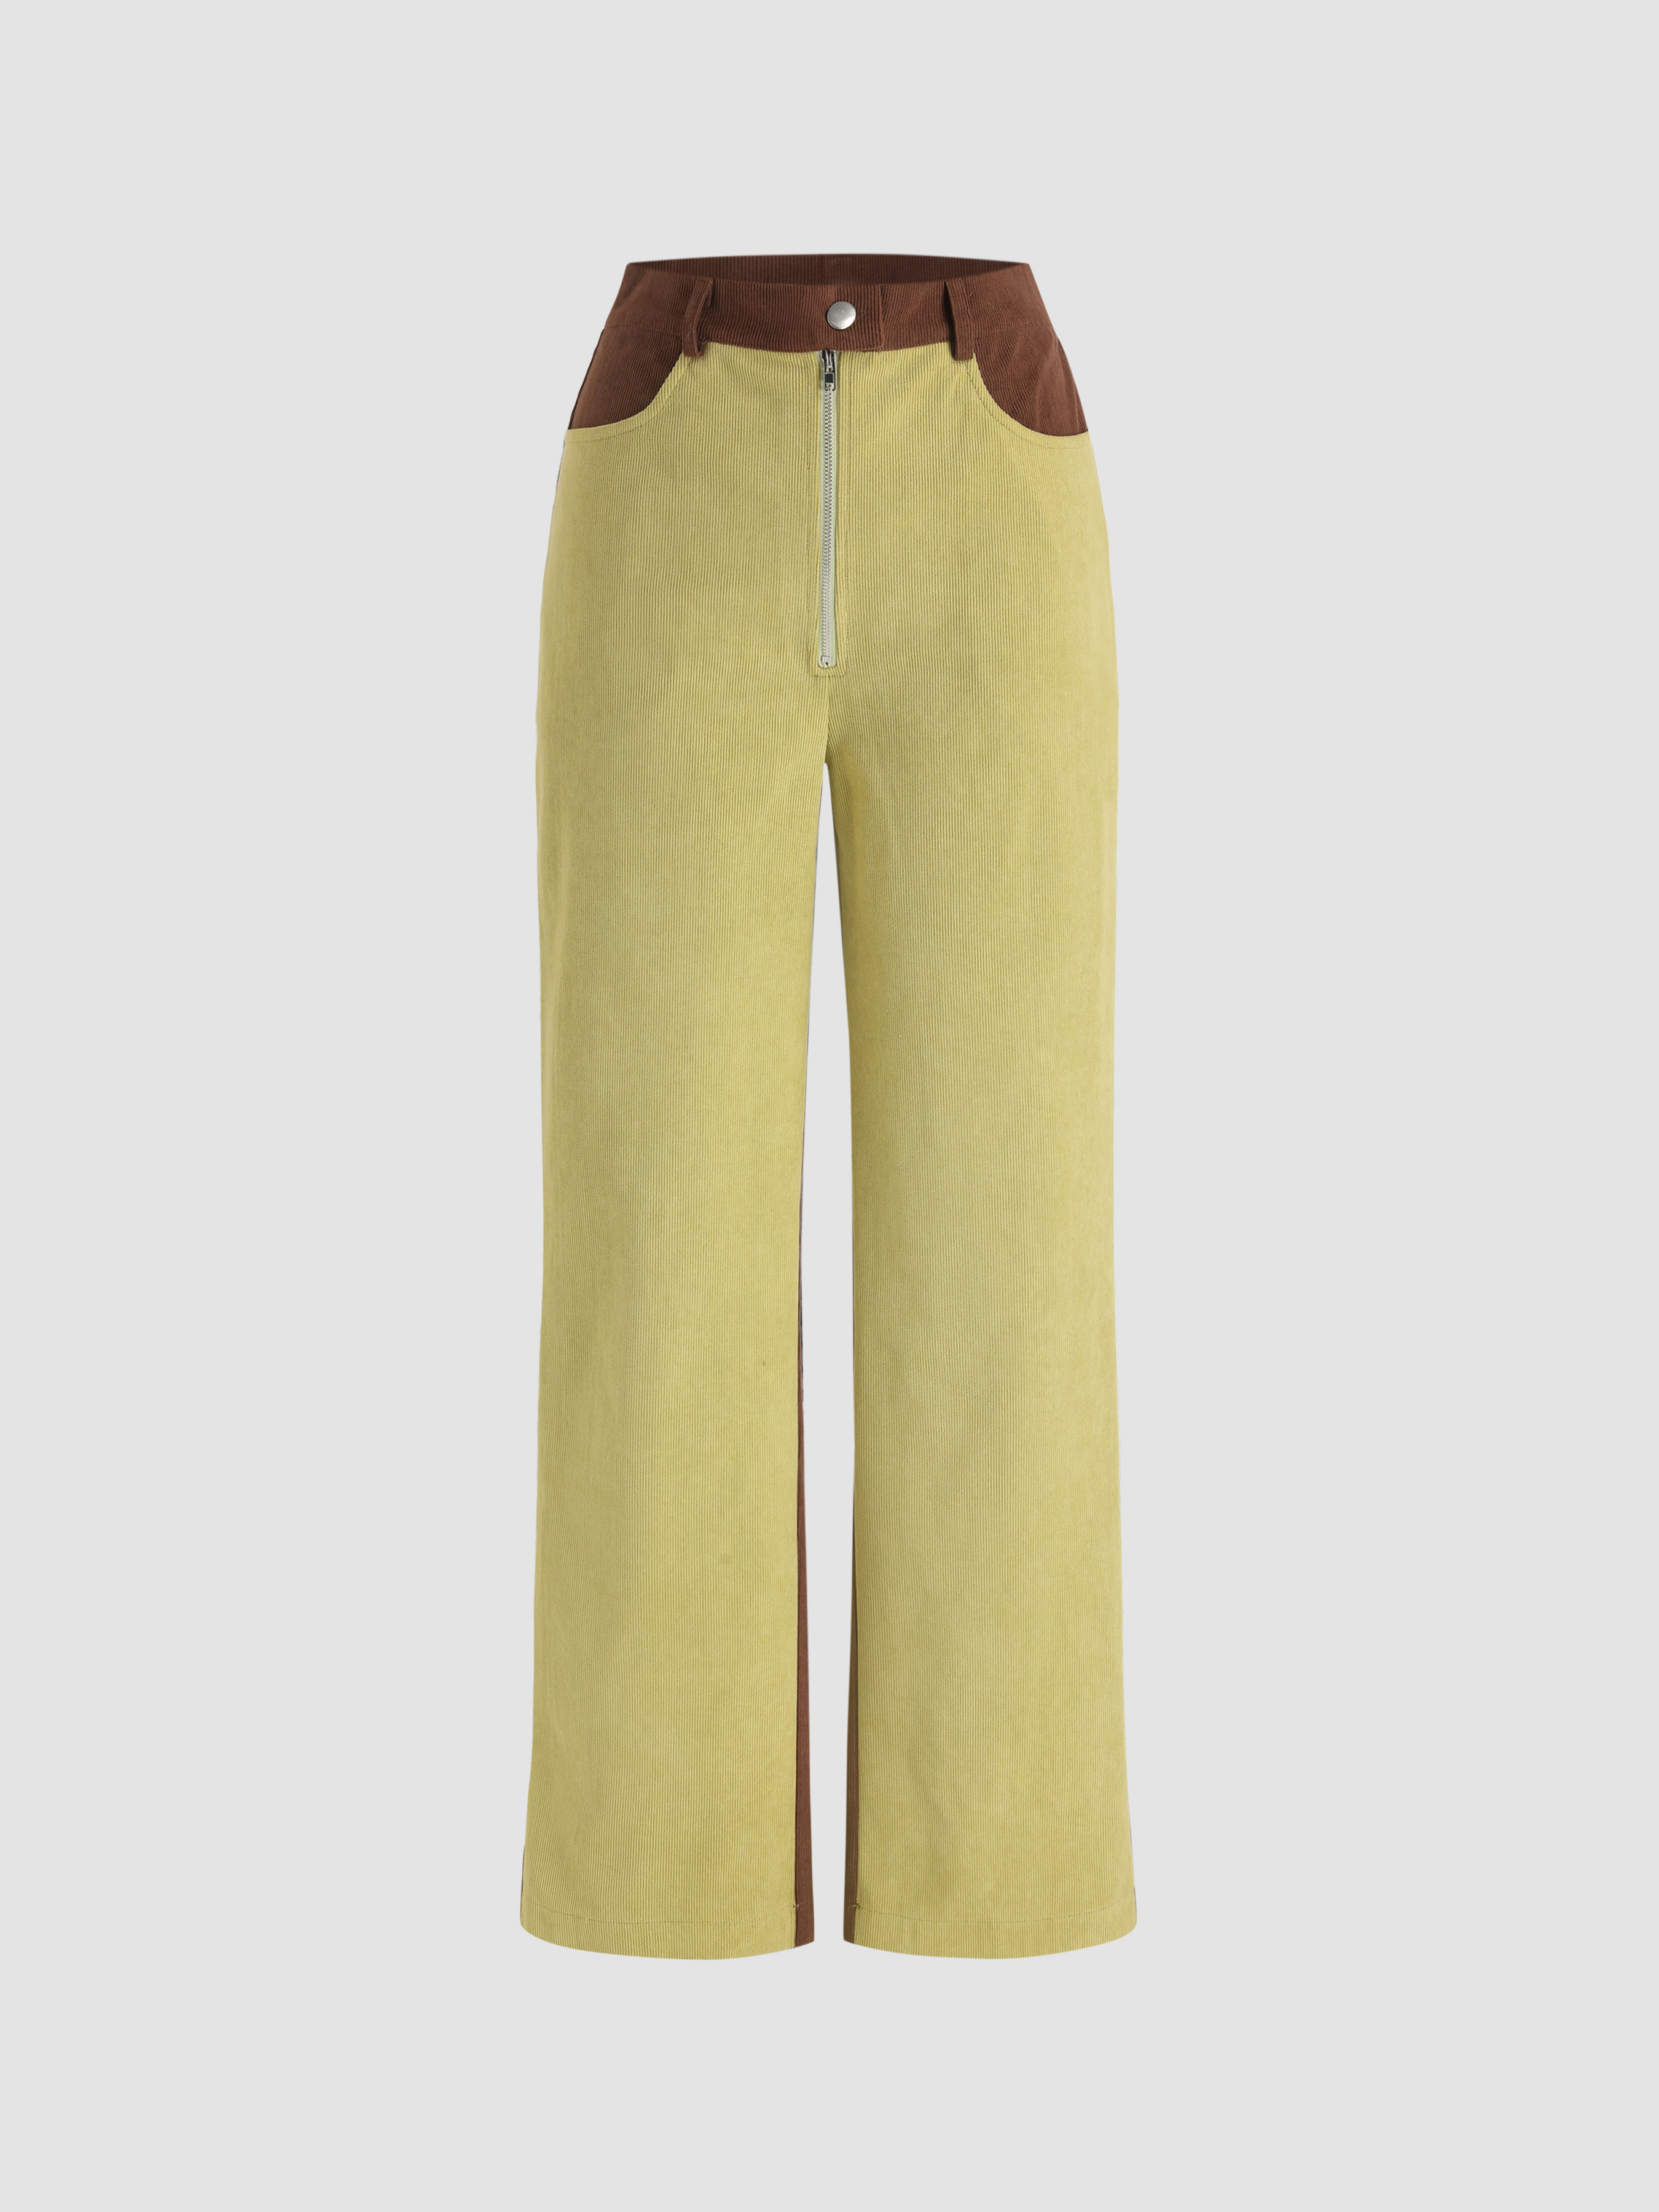 Patchy Corduroy Pants - Cider